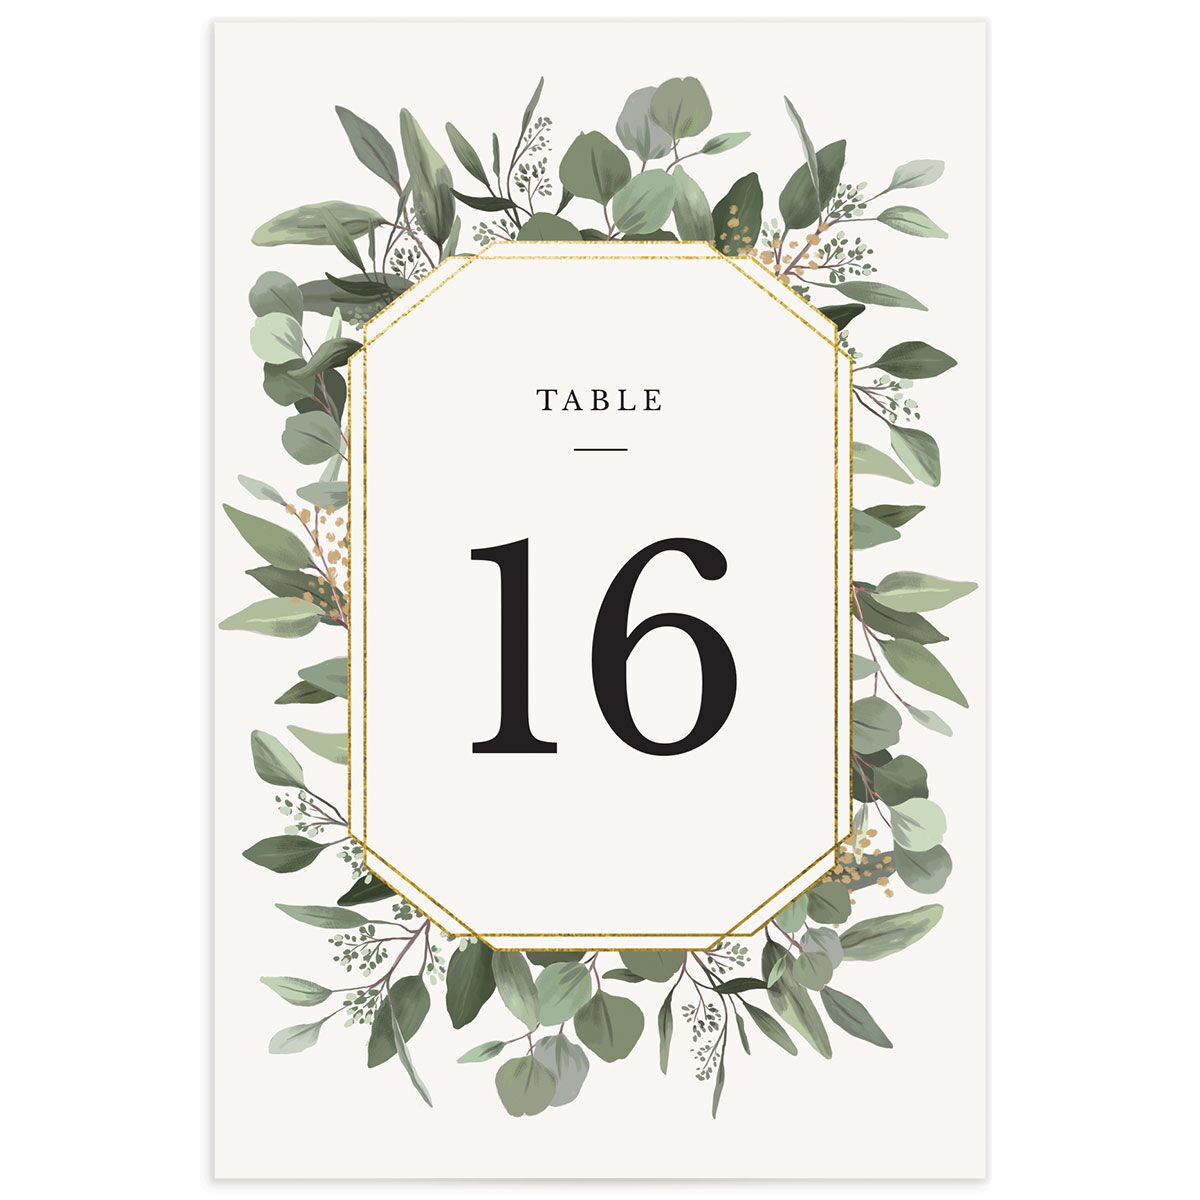 Painted Eucalyptus Table Numbers back in Pure White